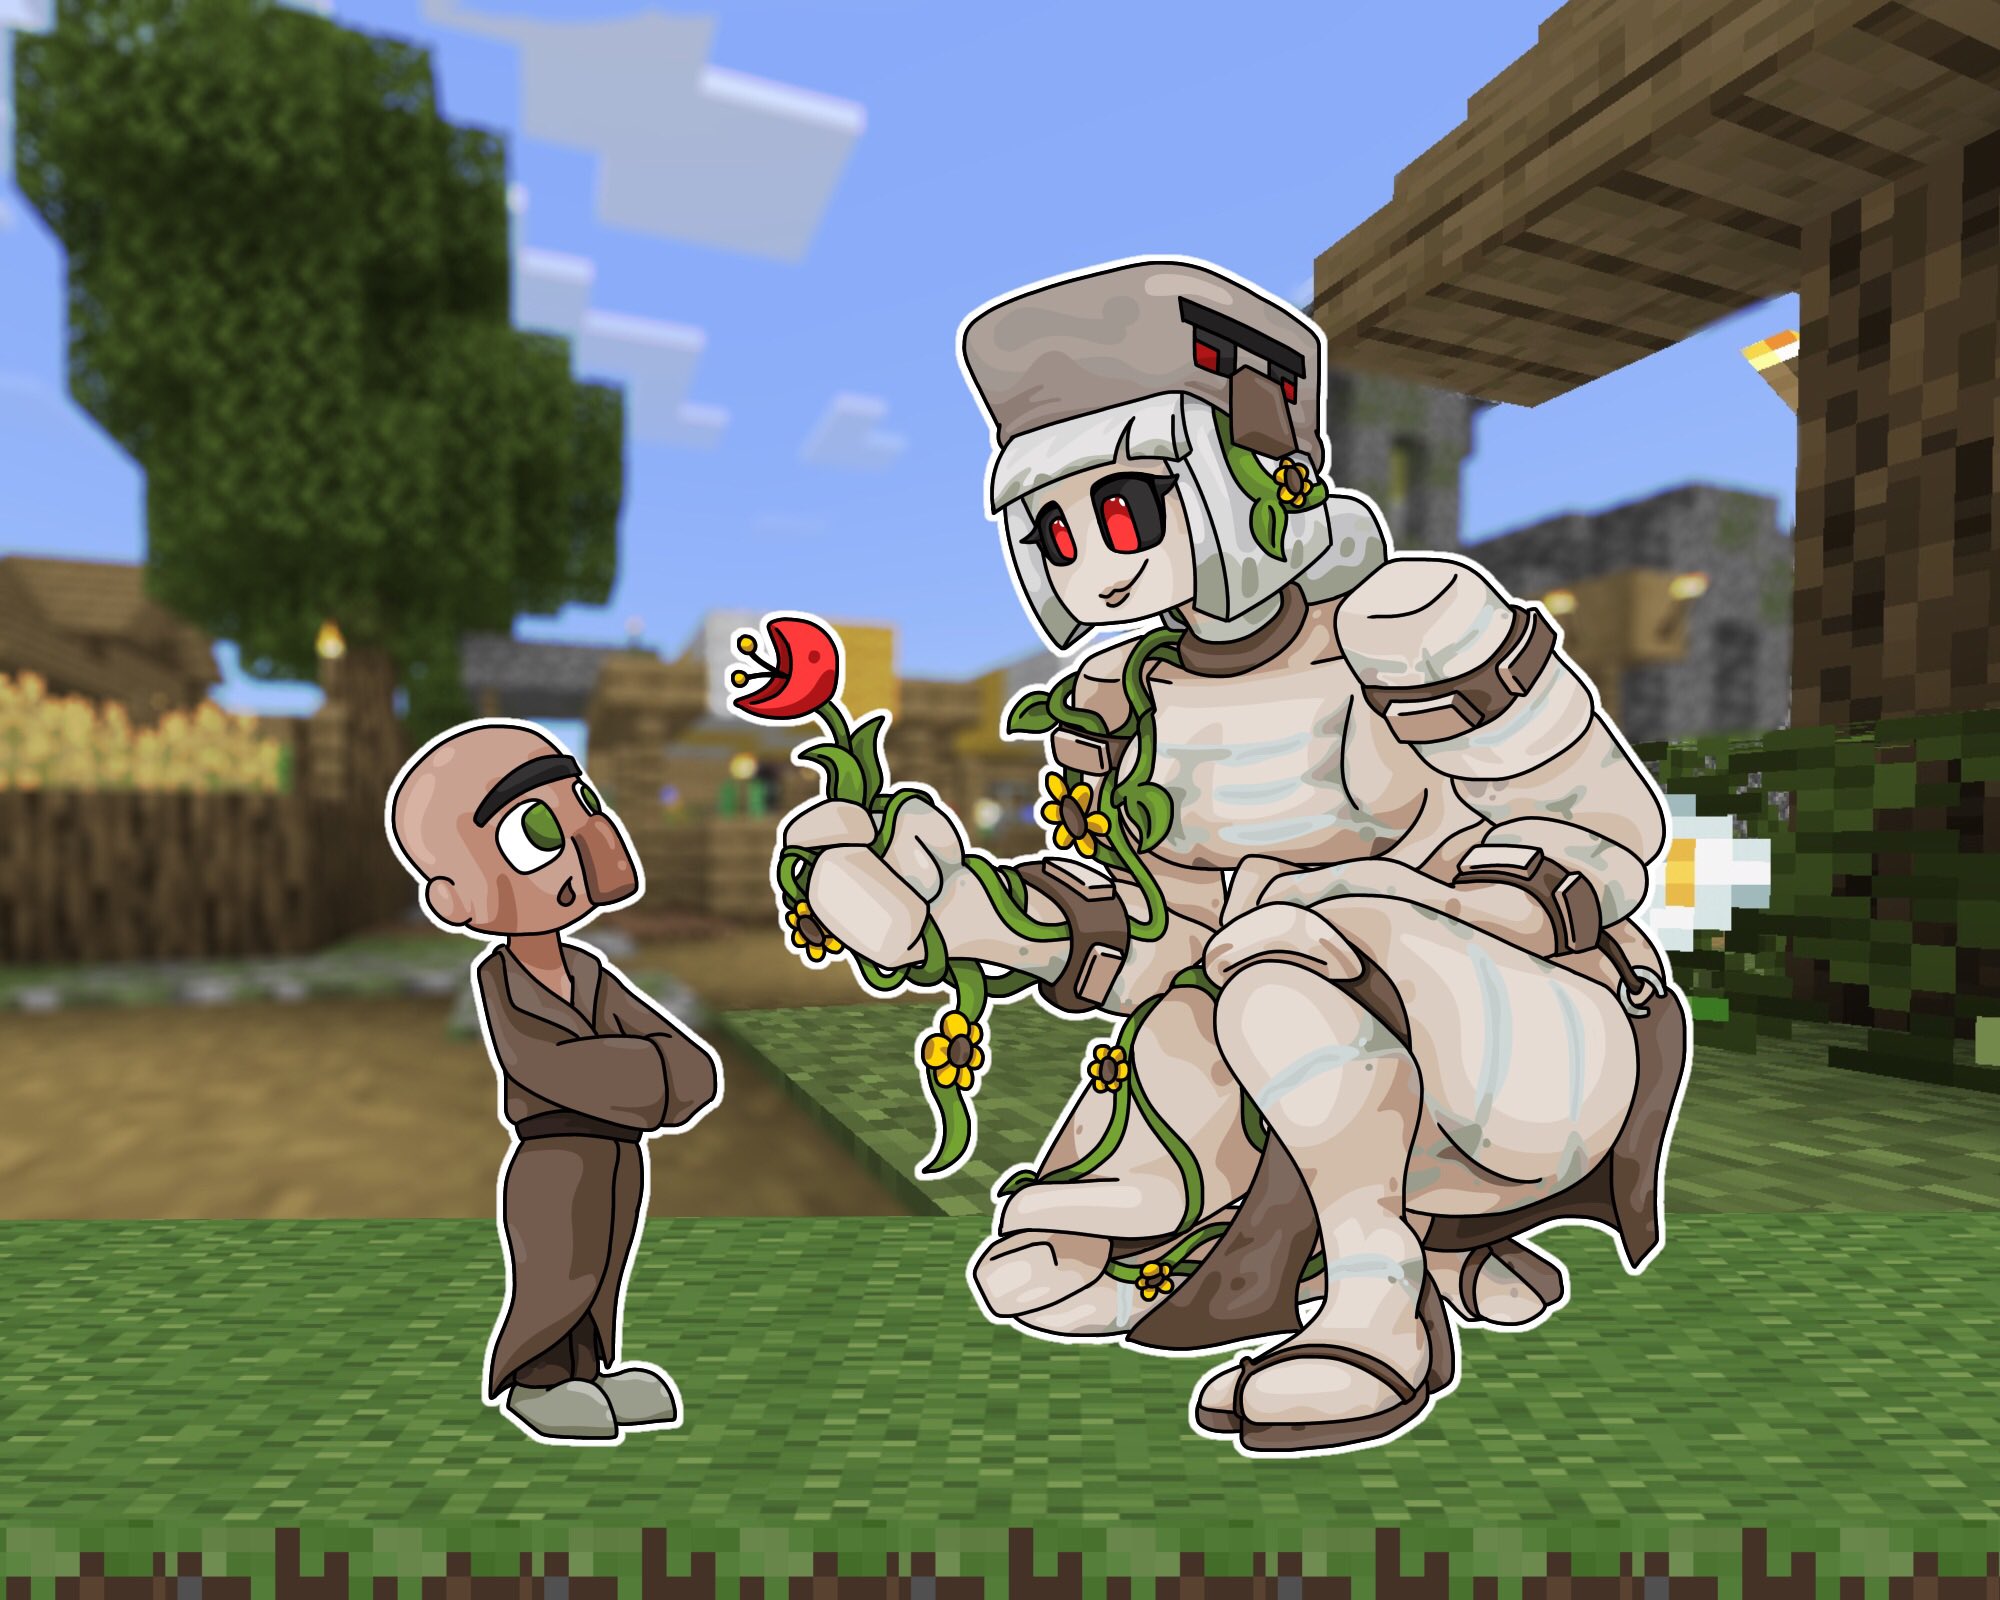 From creepy creepers to lusty villagers: minecraft rule 34 has it all!